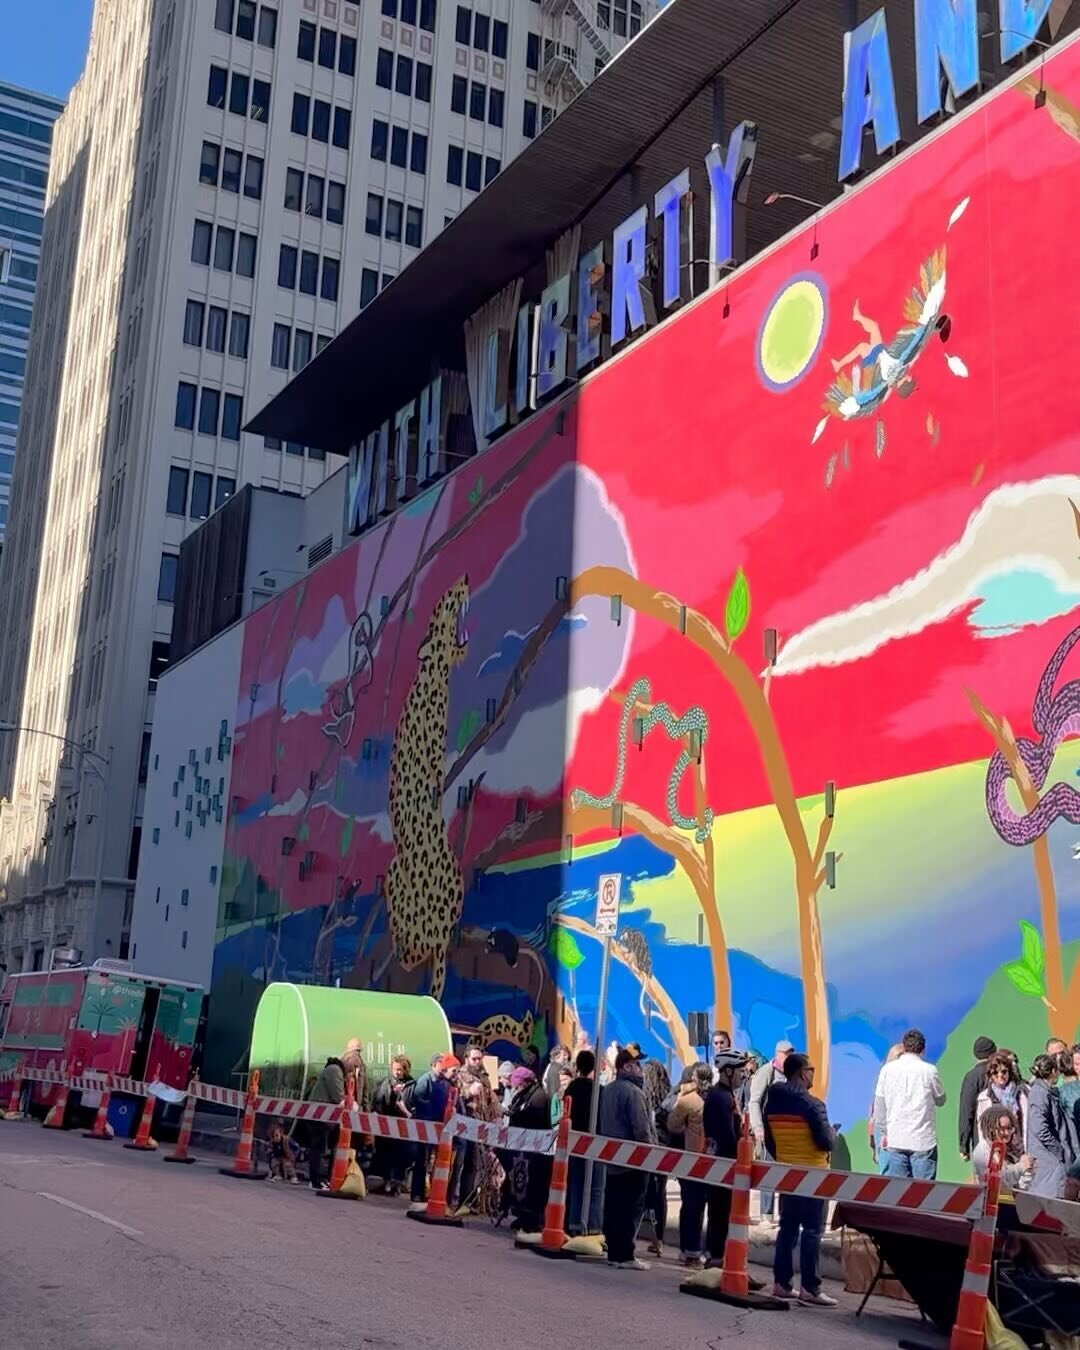 we are all grateful to witness you, @smallest_m. Thank you to our family and friends for an incredible opening weekend.

&ldquo;The Man Who Fell To Earth&rdquo; is now on view at @contemporaryatx for the next few years. The mural depicts a vibrant ju